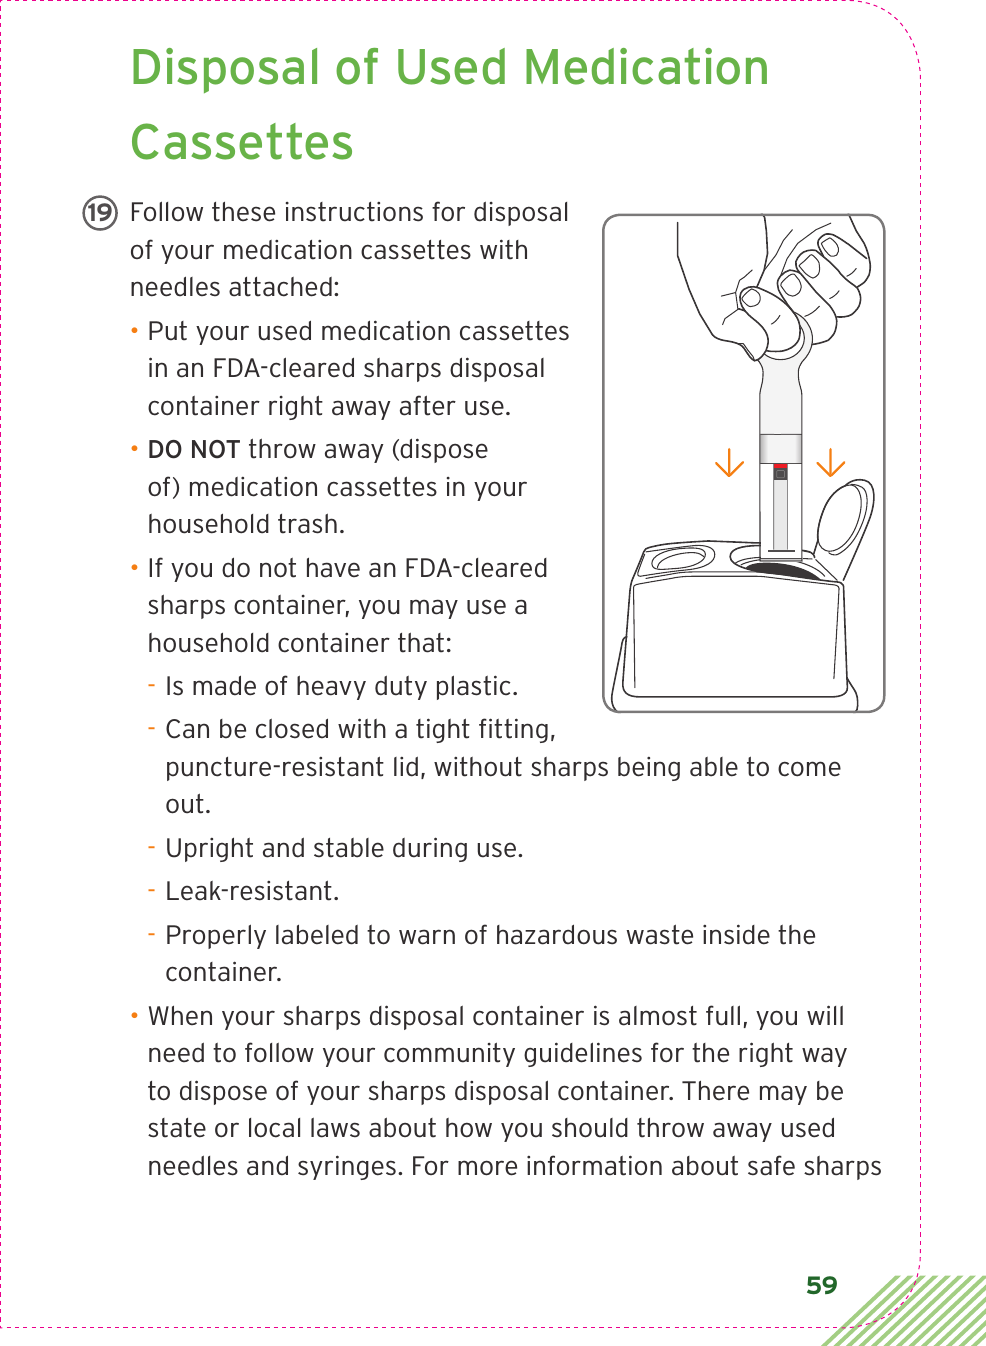 59 Disposal of Used Medication CassettesFollow these instructions for disposal of your medication cassettes with needles attached: • Put your used medication cassettes in an FDA-cleared sharps disposal container right away after use.• DO NOT throw away (dispose of) medication cassettes in your household trash.• If you do not have an FDA-cleared sharps container, you may use a household container that: - Is made of heavy duty plastic. - Can be closed with a tight ﬁ tting, puncture-resistant lid, without sharps being able to come out. - Upright and stable during use. - Leak-resistant. - Properly labeled to warn of hazardous waste inside the container.• When your sharps disposal container is almost full, you will need to follow your community guidelines for the right way to dispose of your sharps disposal container. There may be state or local laws about how you should throw away used needles and syringes. For more information about safe sharps LBL3_CIM_PS_6Rx Only19